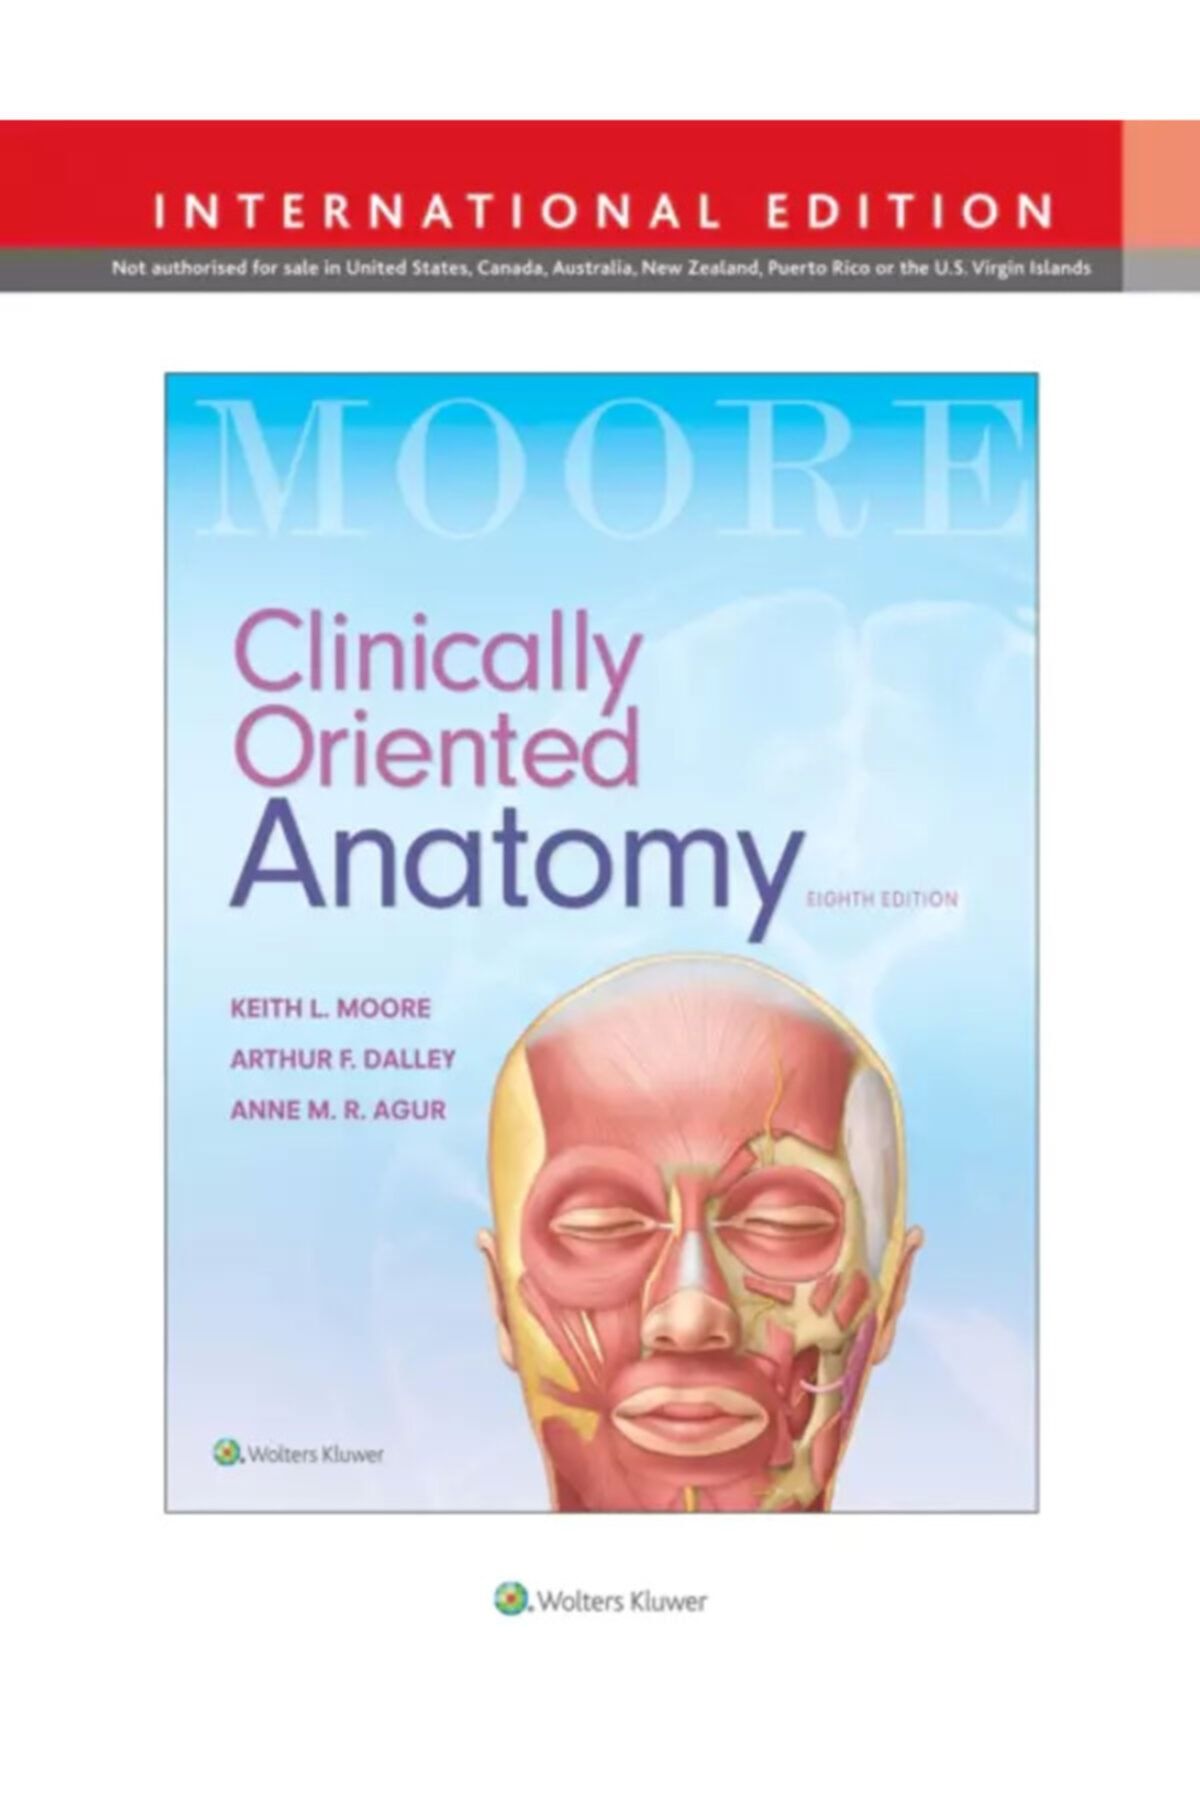 Wolters Kluwer Clinically Oriented Anatomy